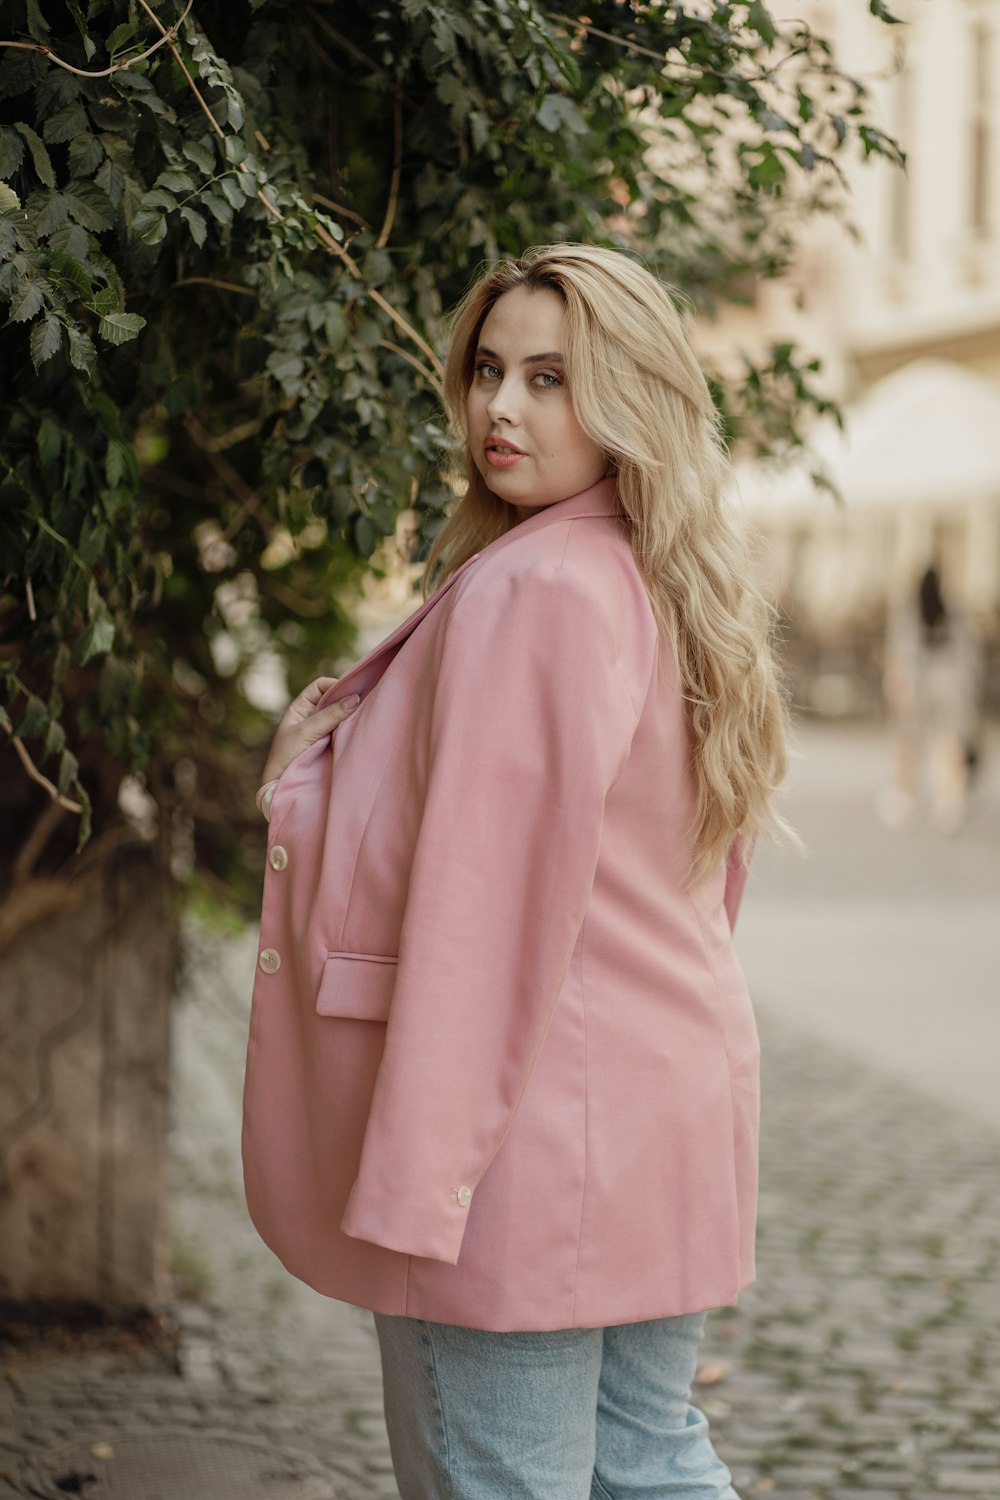 a woman in a pink jacket standing on a cobblestone street